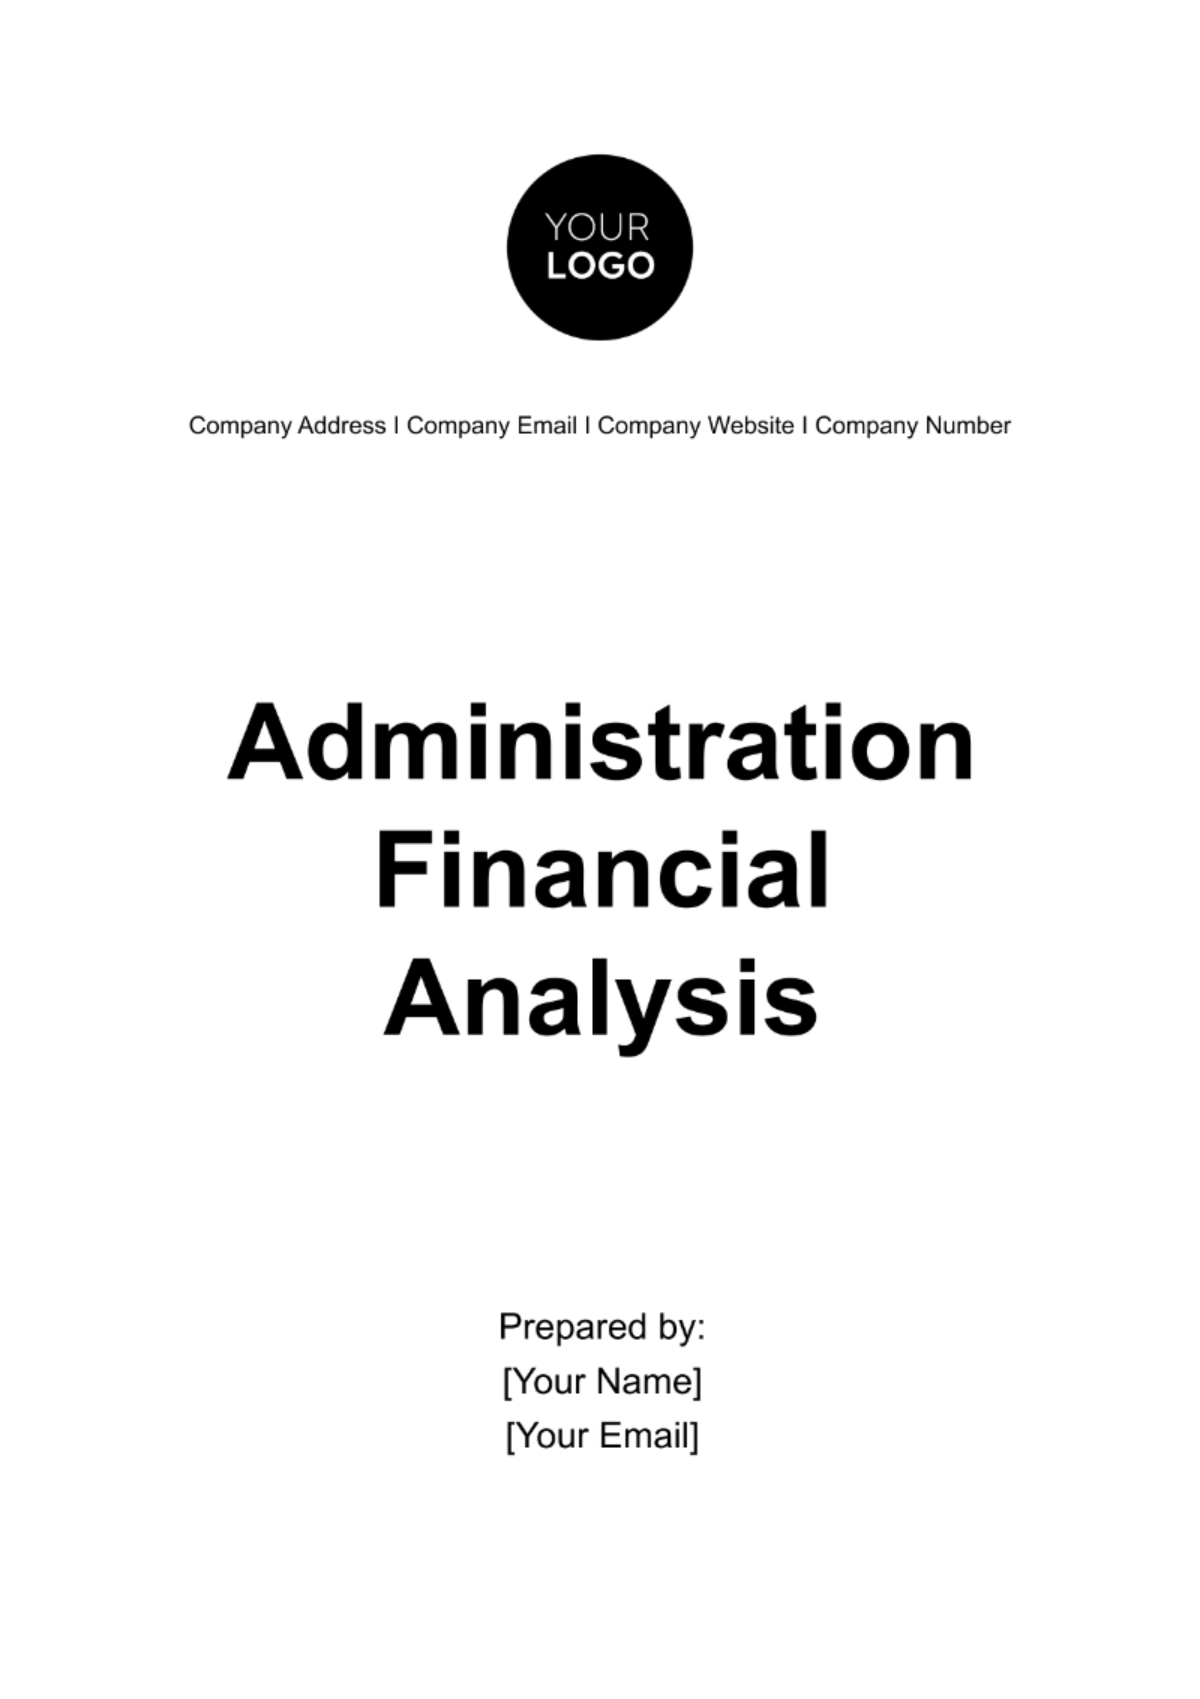 Administration Financial Analysis Template